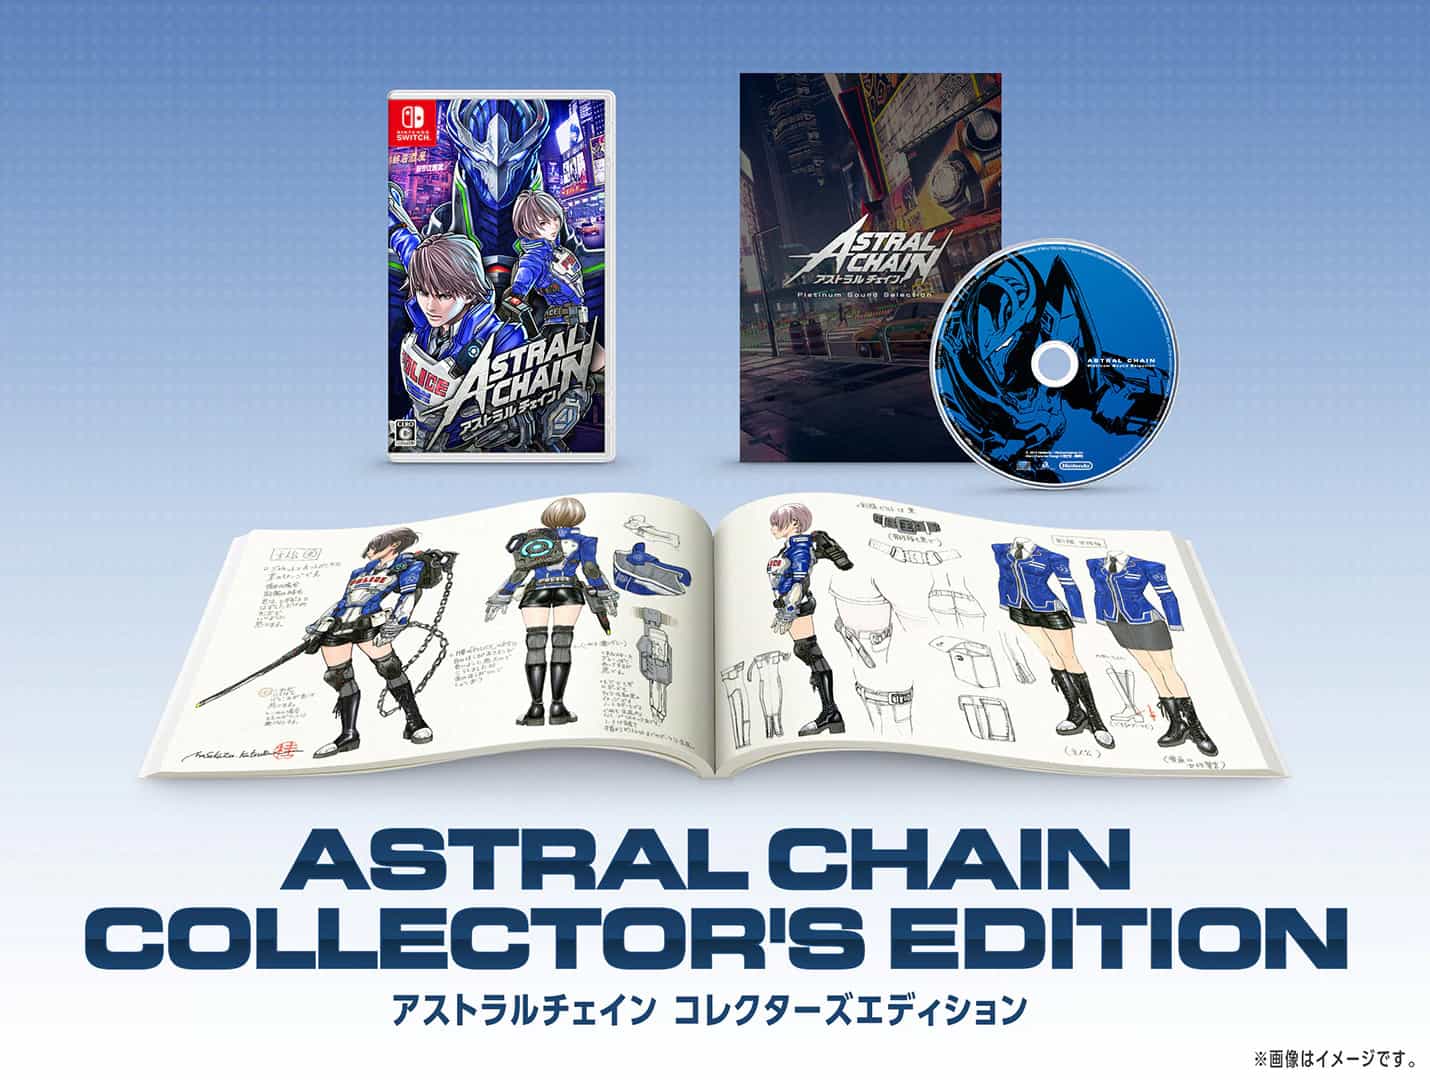 Astral Chain 10